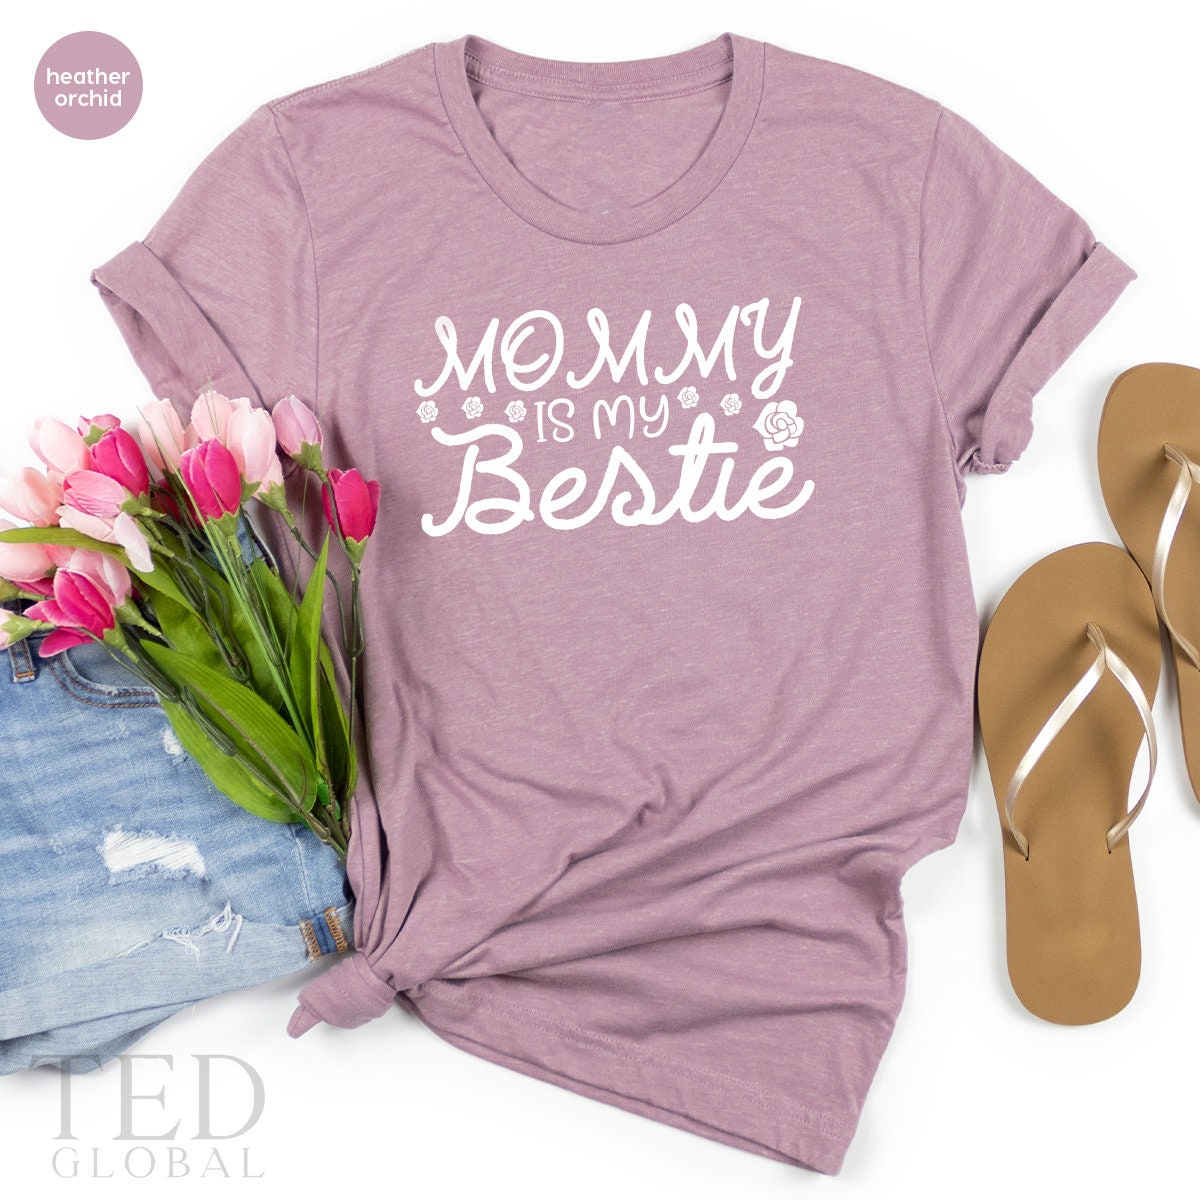 Best Mom TShirt, Mama T Shirt, Cute Mommy T-Shirt, Mothers Day Gifts, Mommy Is My Bestie Shirt, Mother Birthday T Shirt, Friend Mom Tee - Fastdeliverytees.com